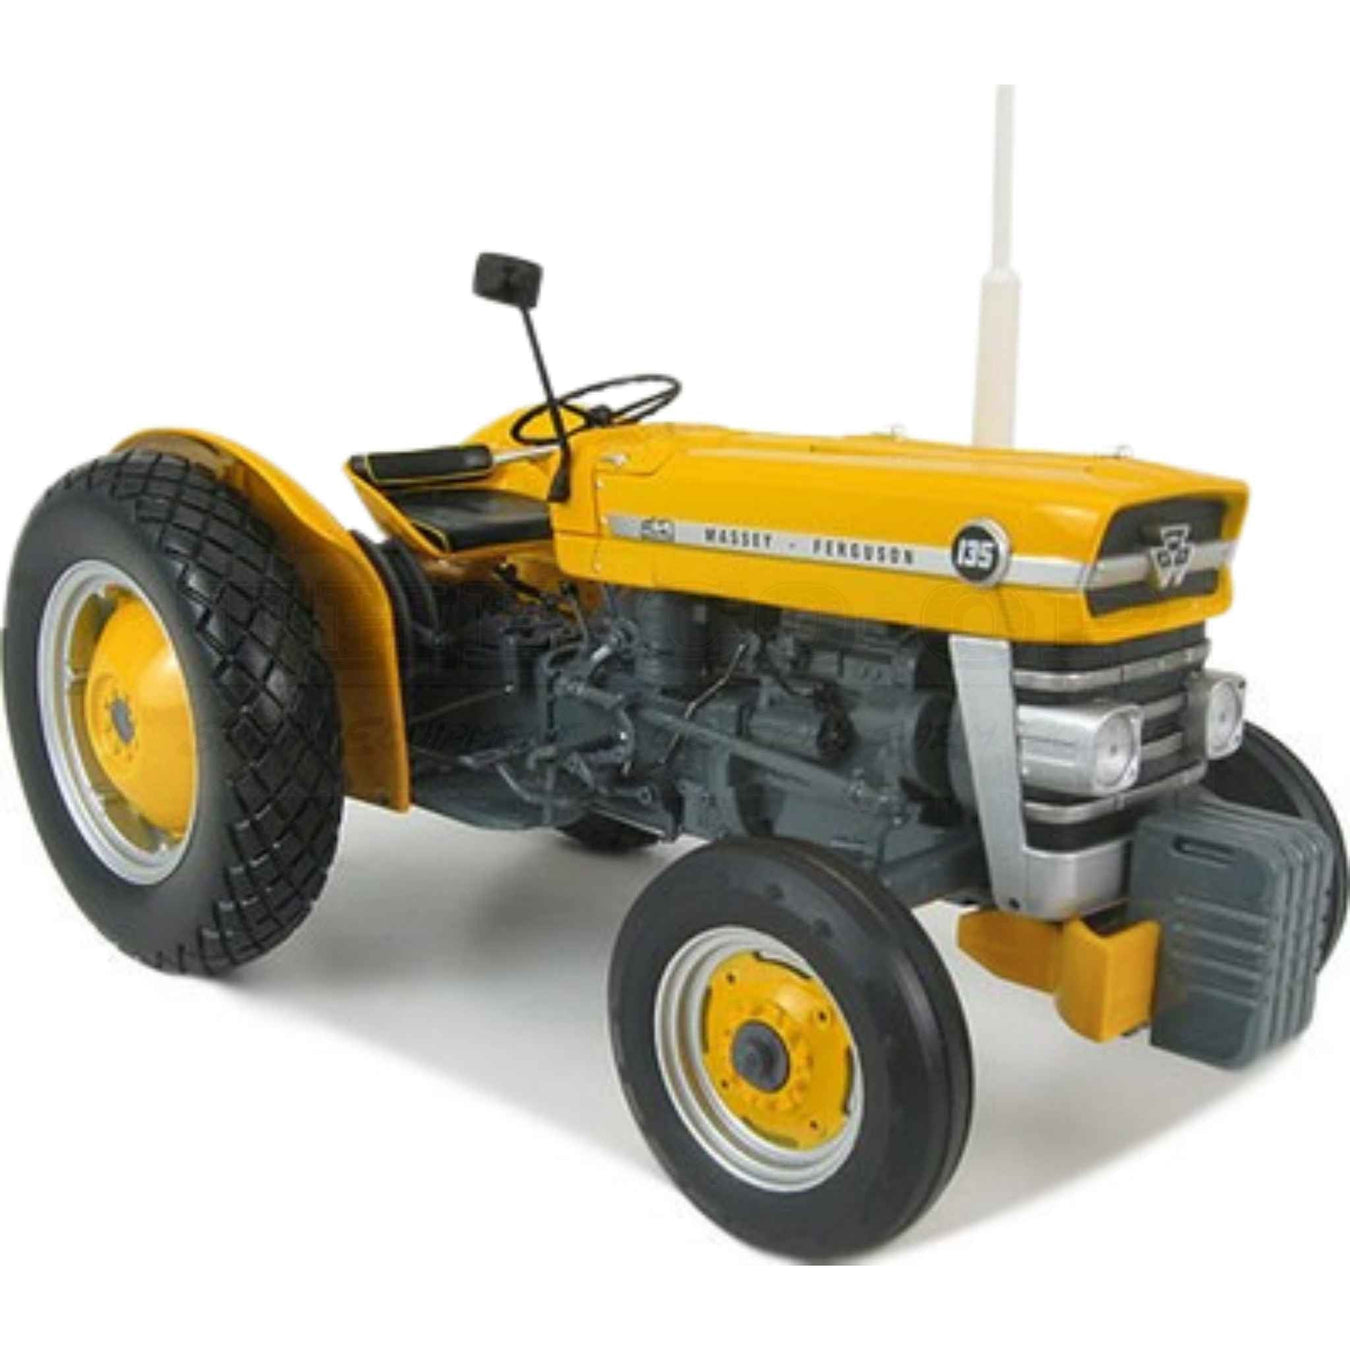 model tractor image